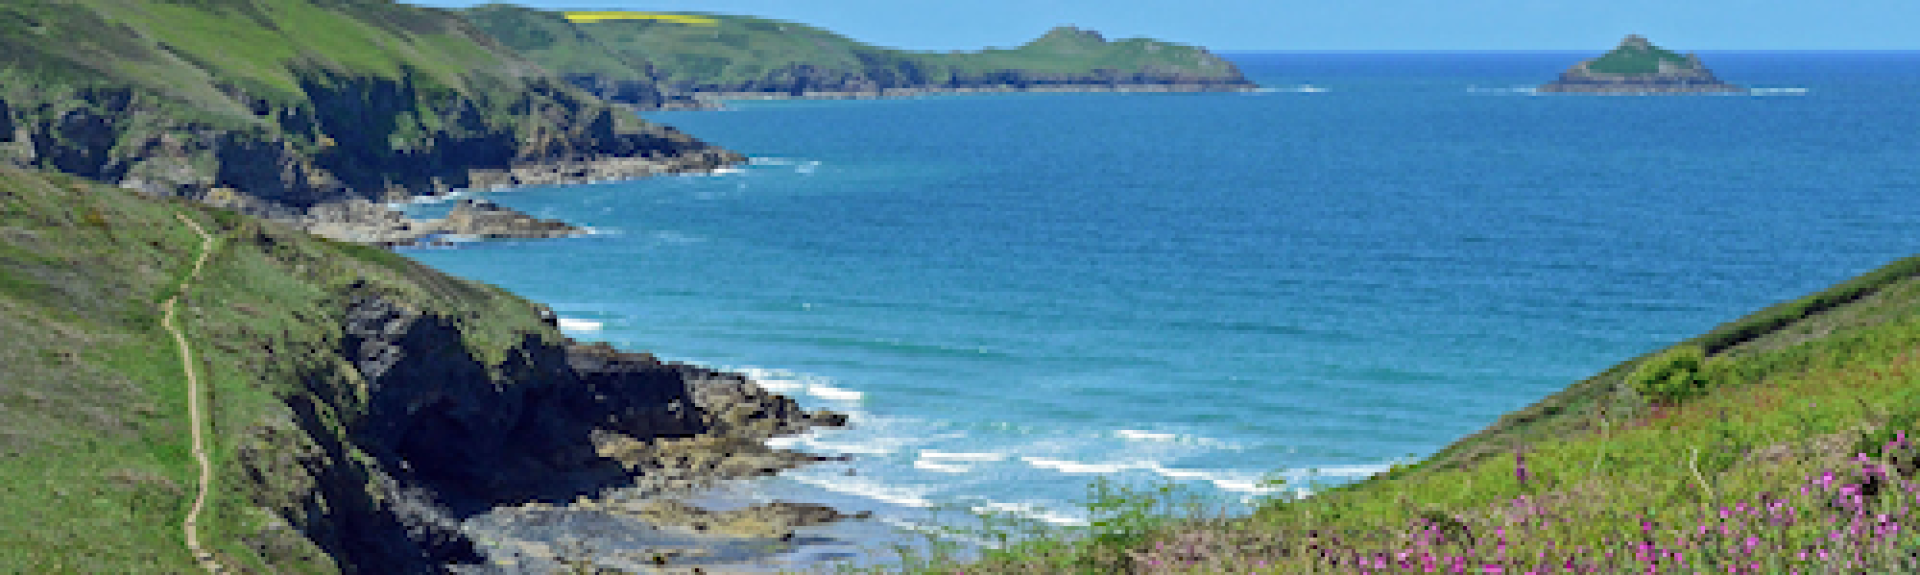 A clifftop view of a bay on the North Cornwall coast.